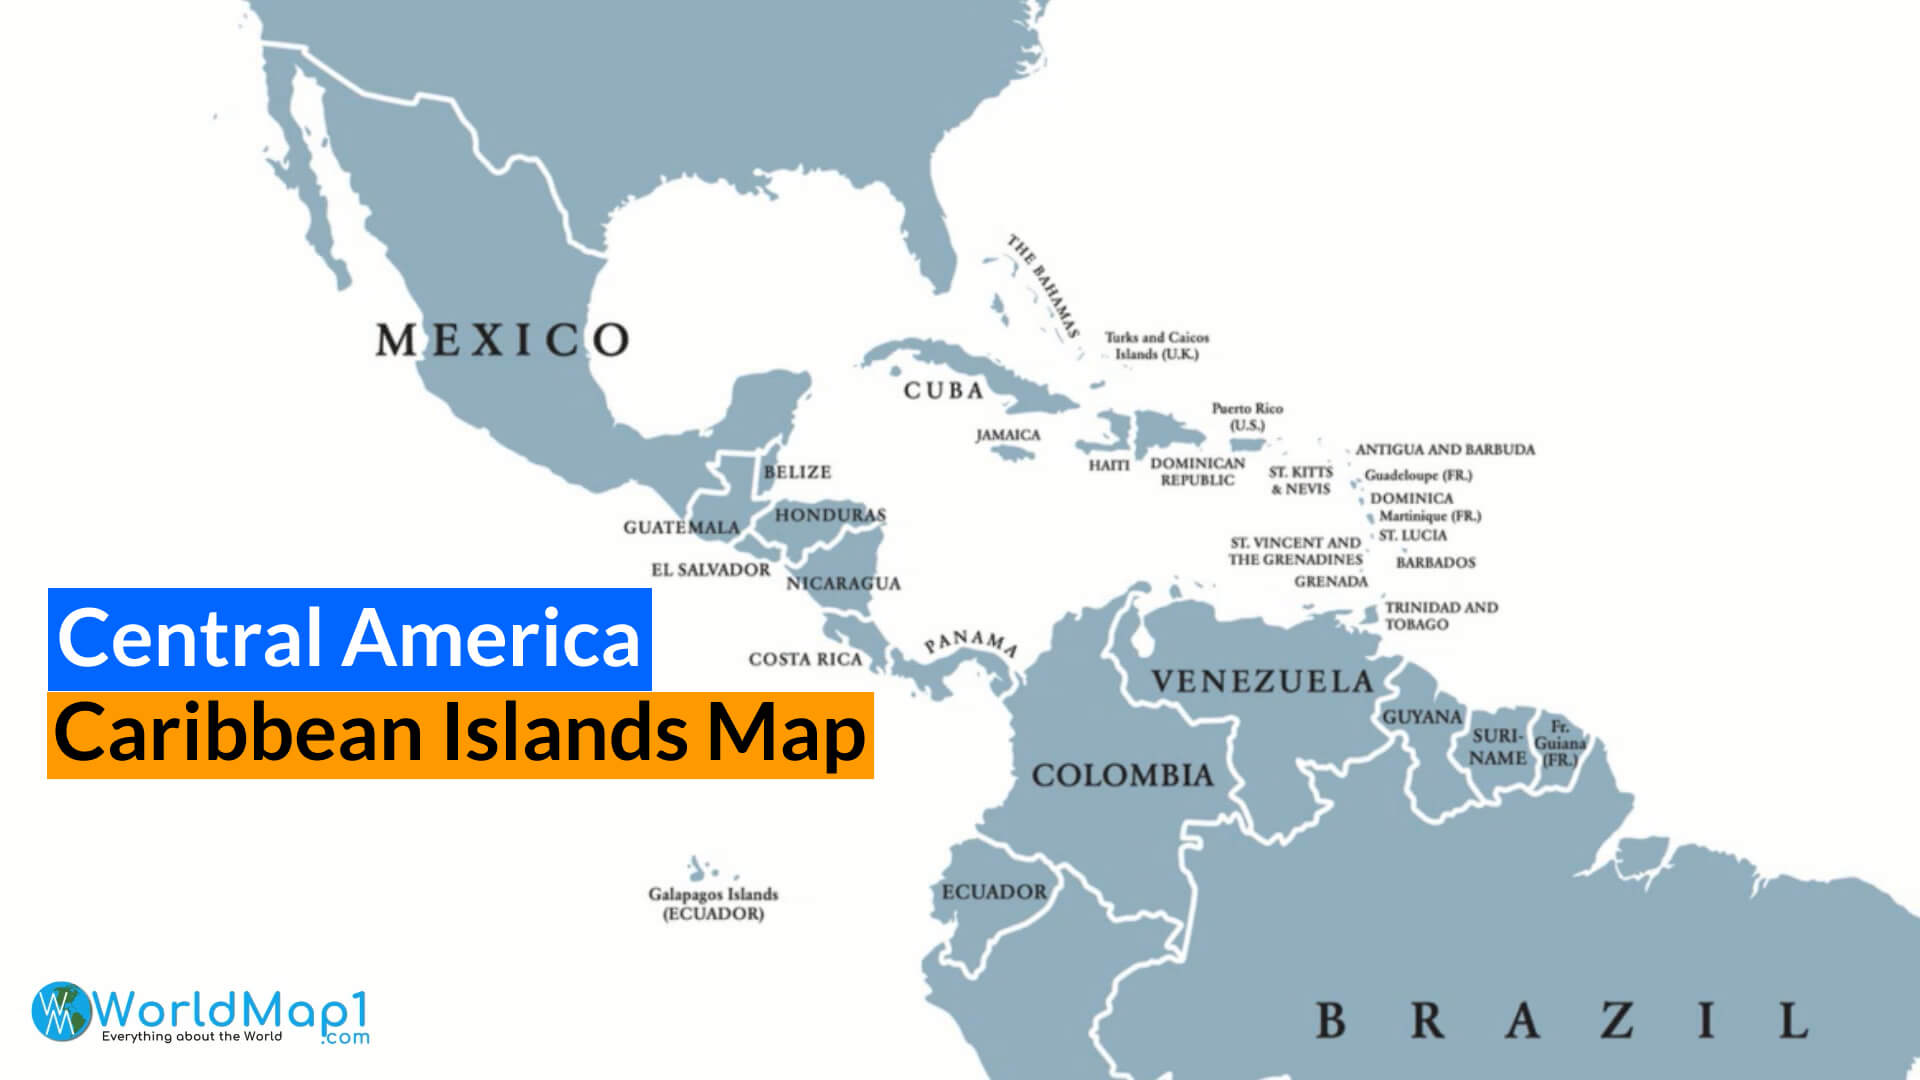 Cental America and Caribbean Islands Map